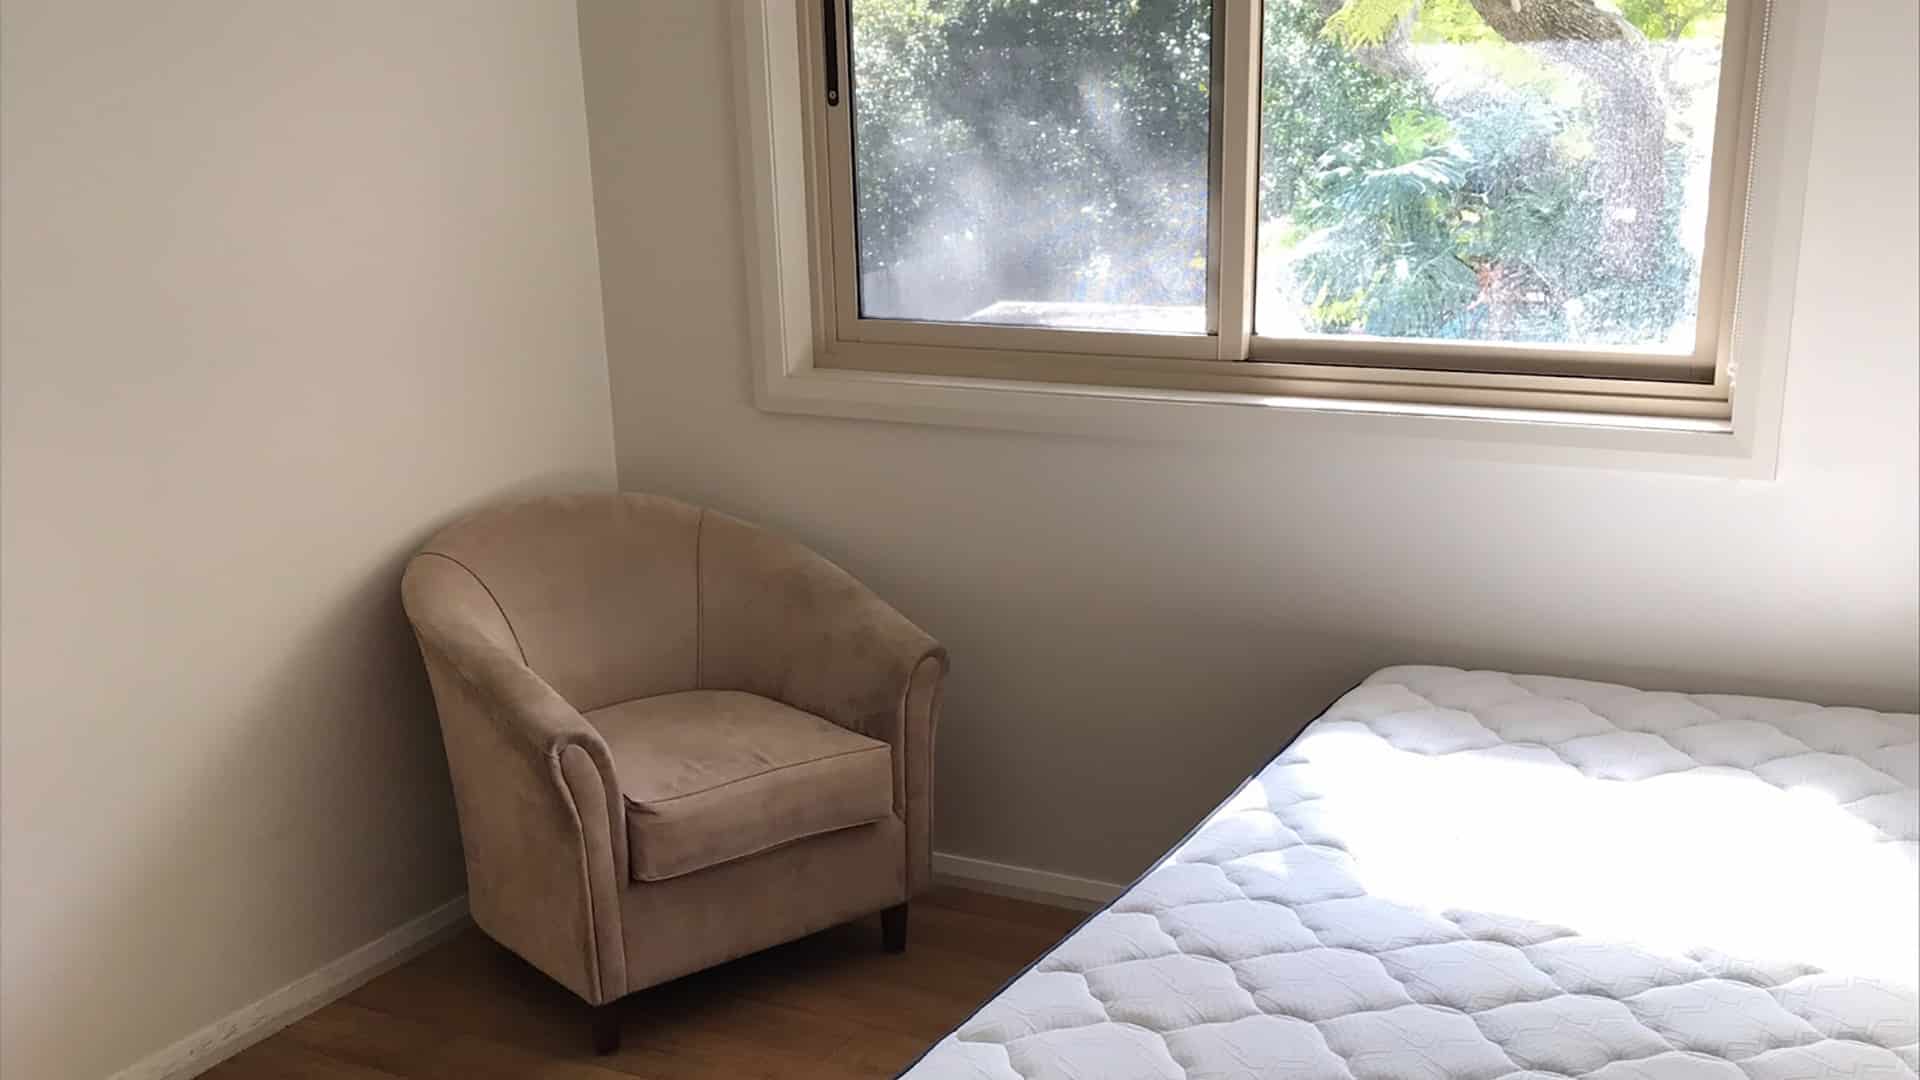 View of a bedroom with a bed and chair below a window.